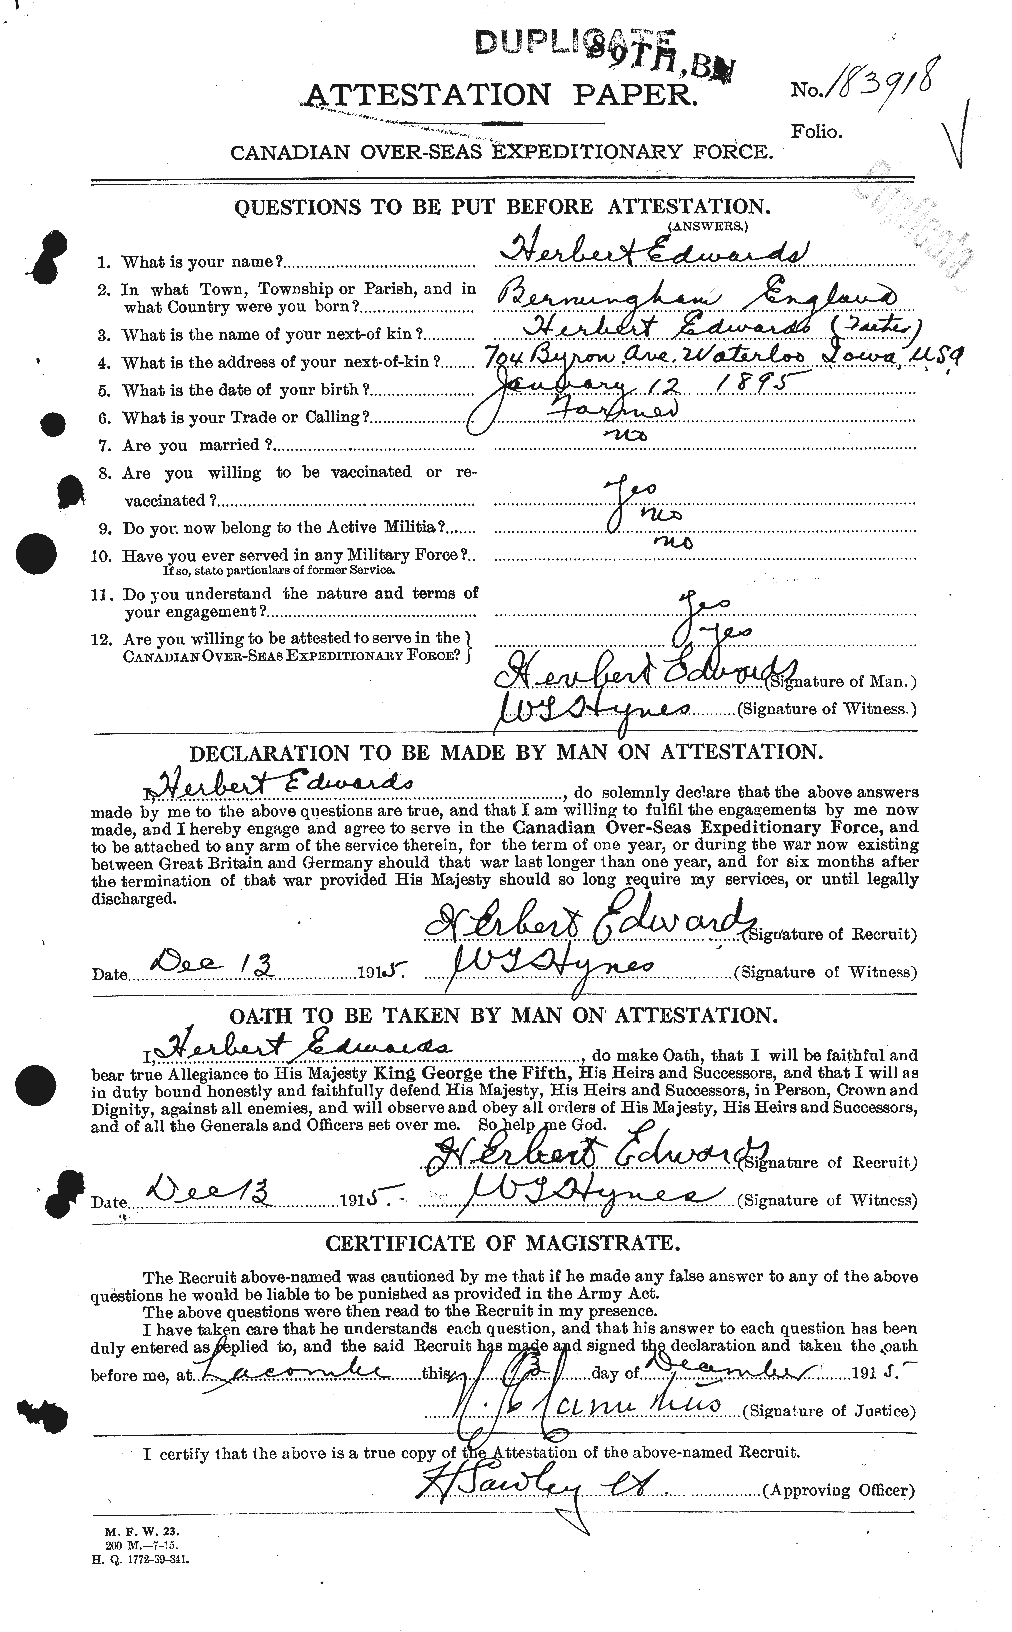 Personnel Records of the First World War - CEF 309768a